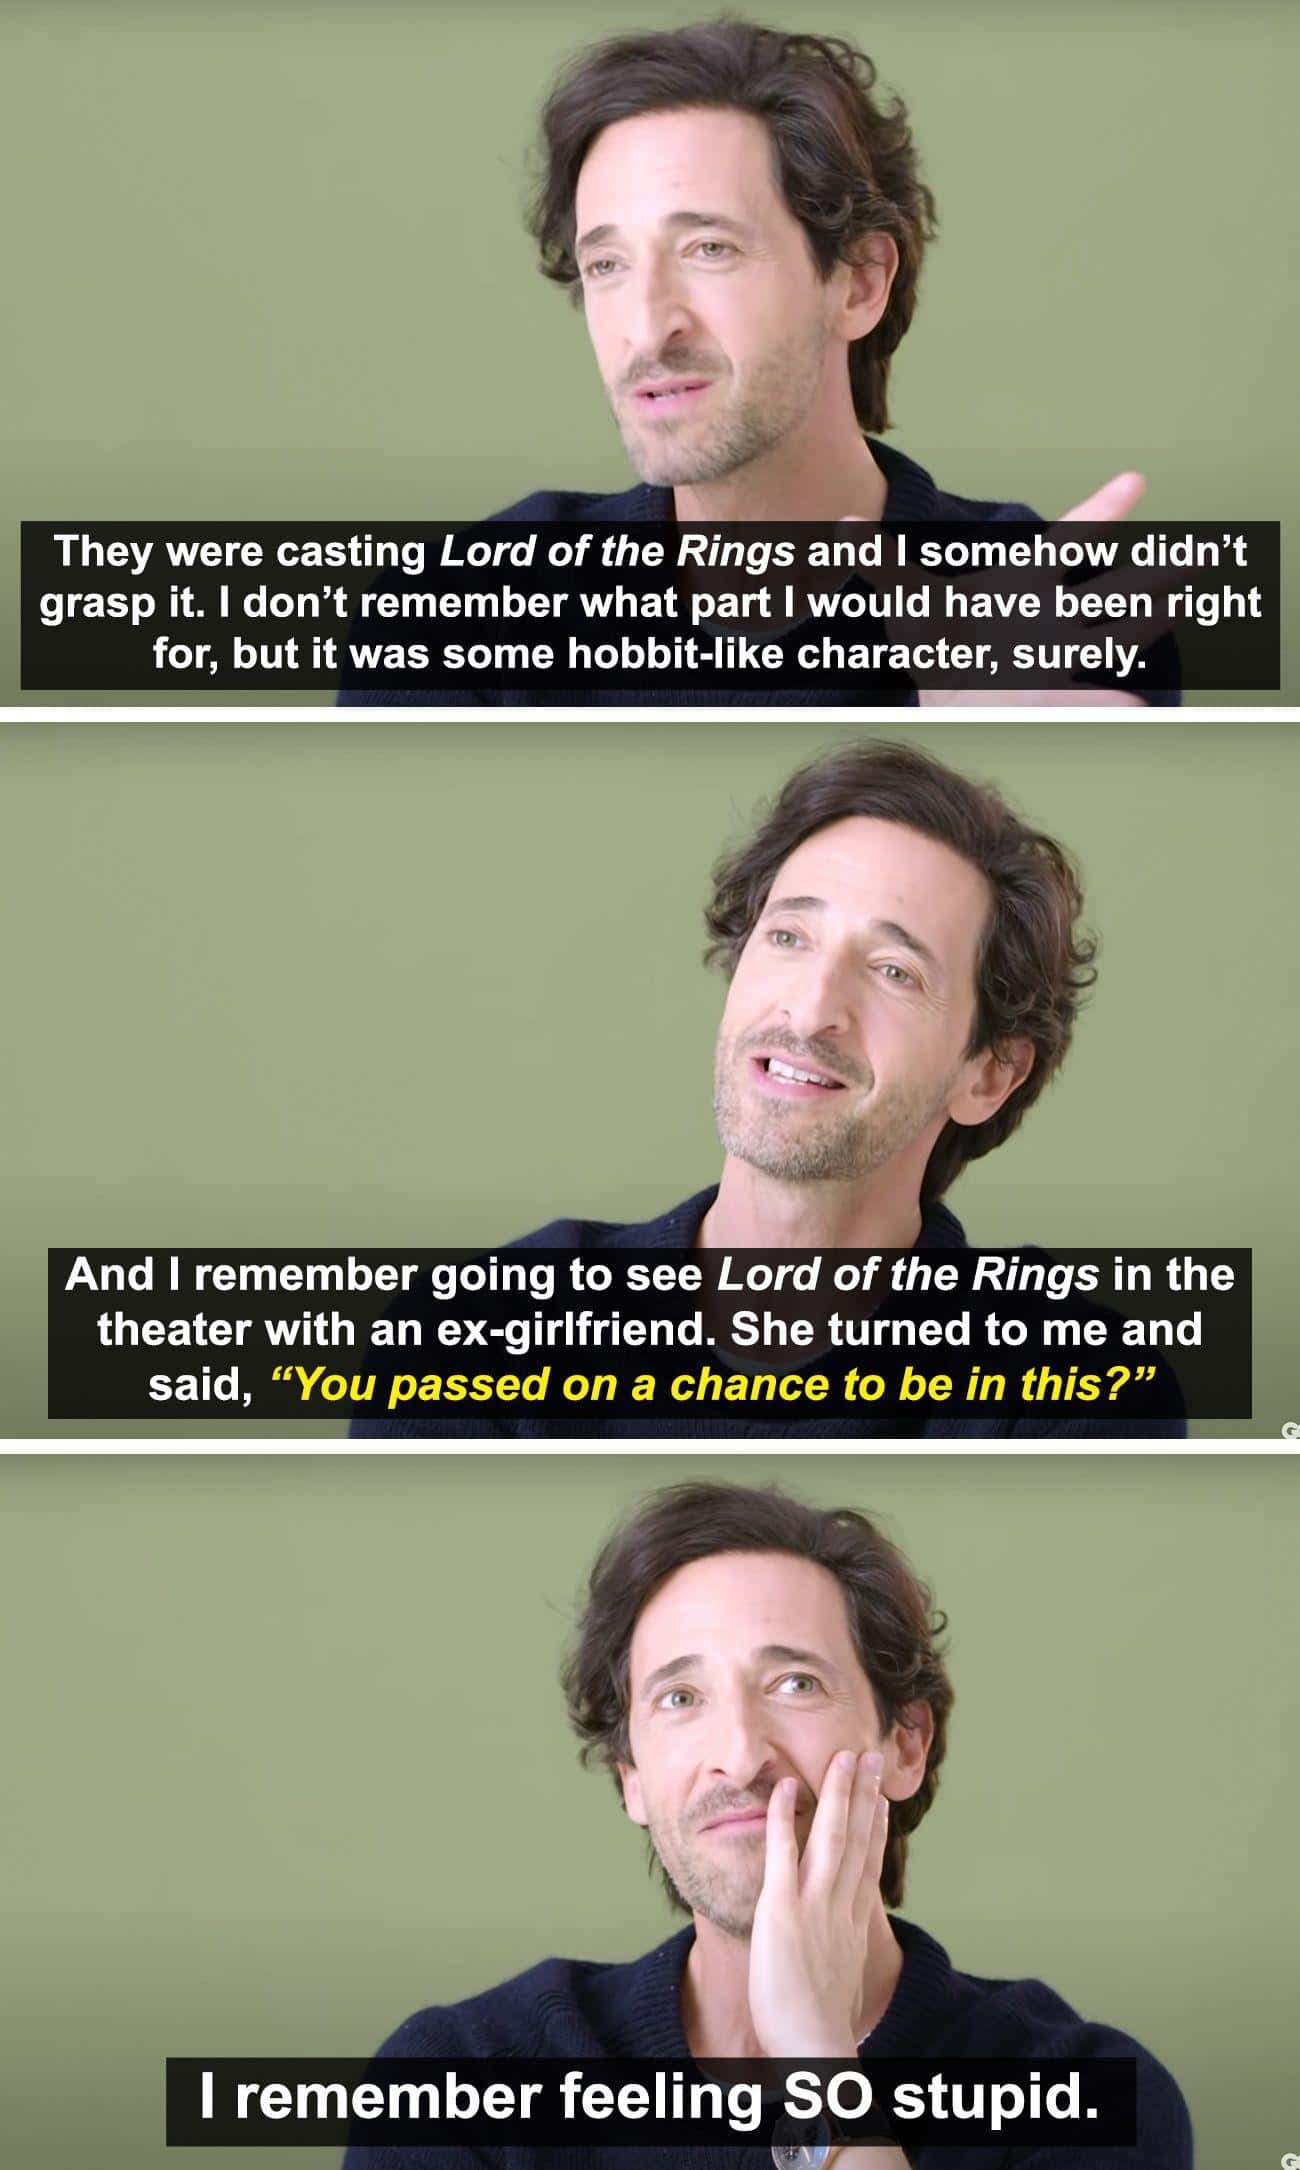 Adrien Brody Passed On An Opportunity To Be In 'The Lord of the Rings'